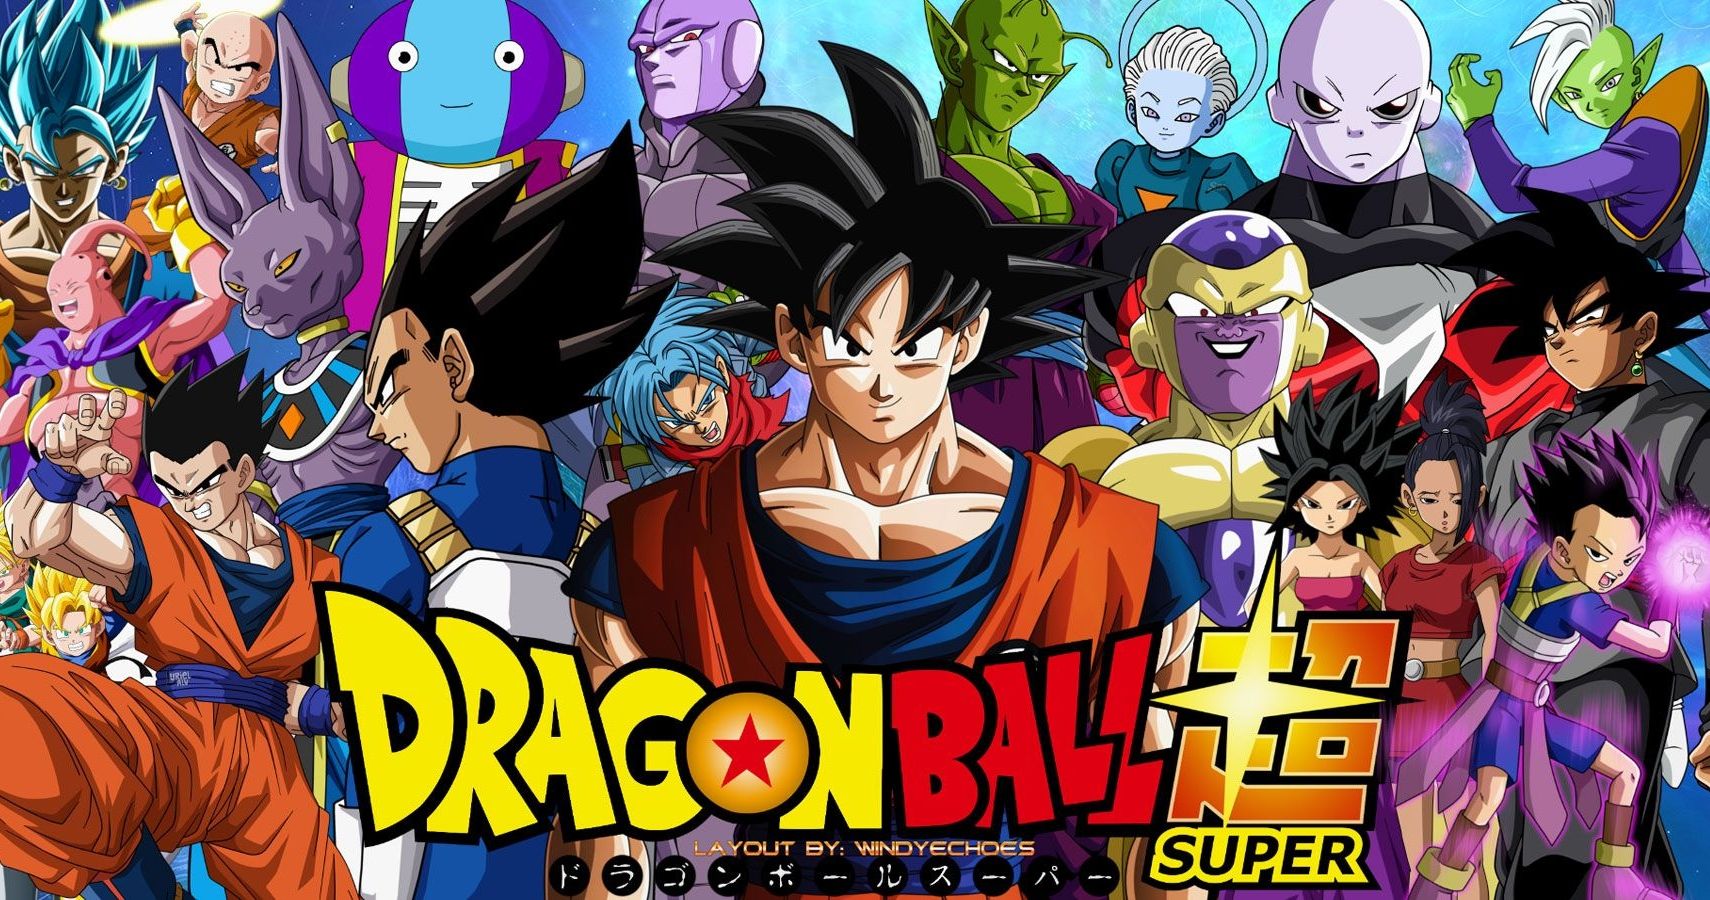 A New Dragon Ball Super Movie Confirmed For 22